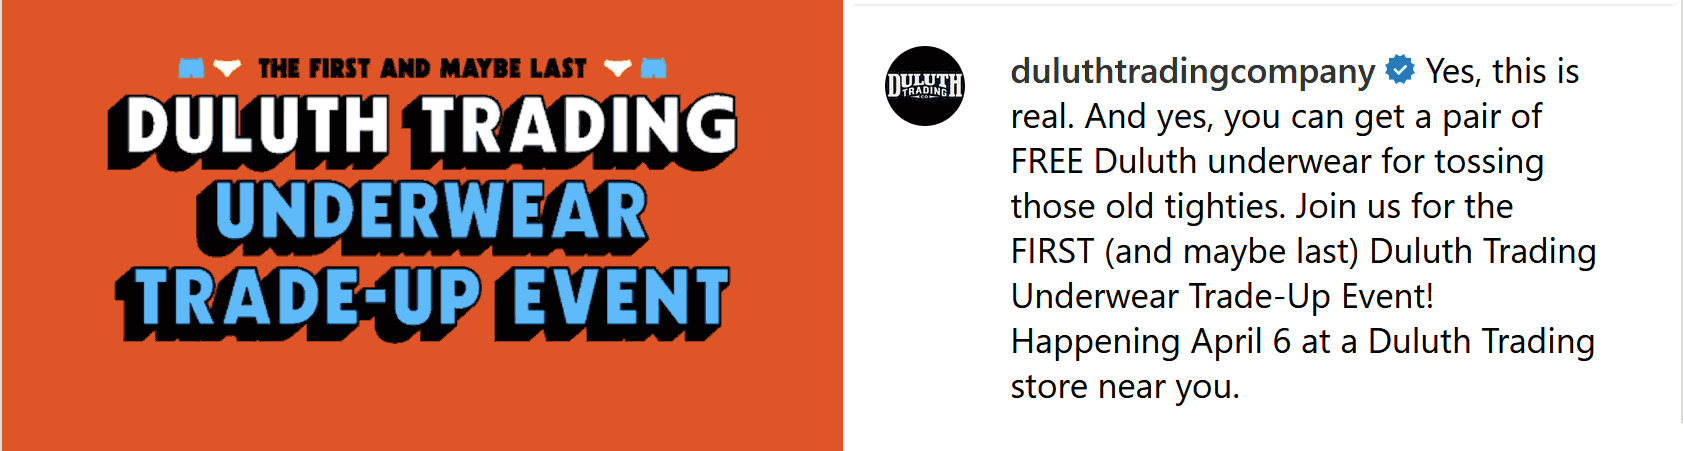 Duluth Trading stores Coupon  Trade in your underwear free the 6th at Duluth Trading Company #duluthtrading 